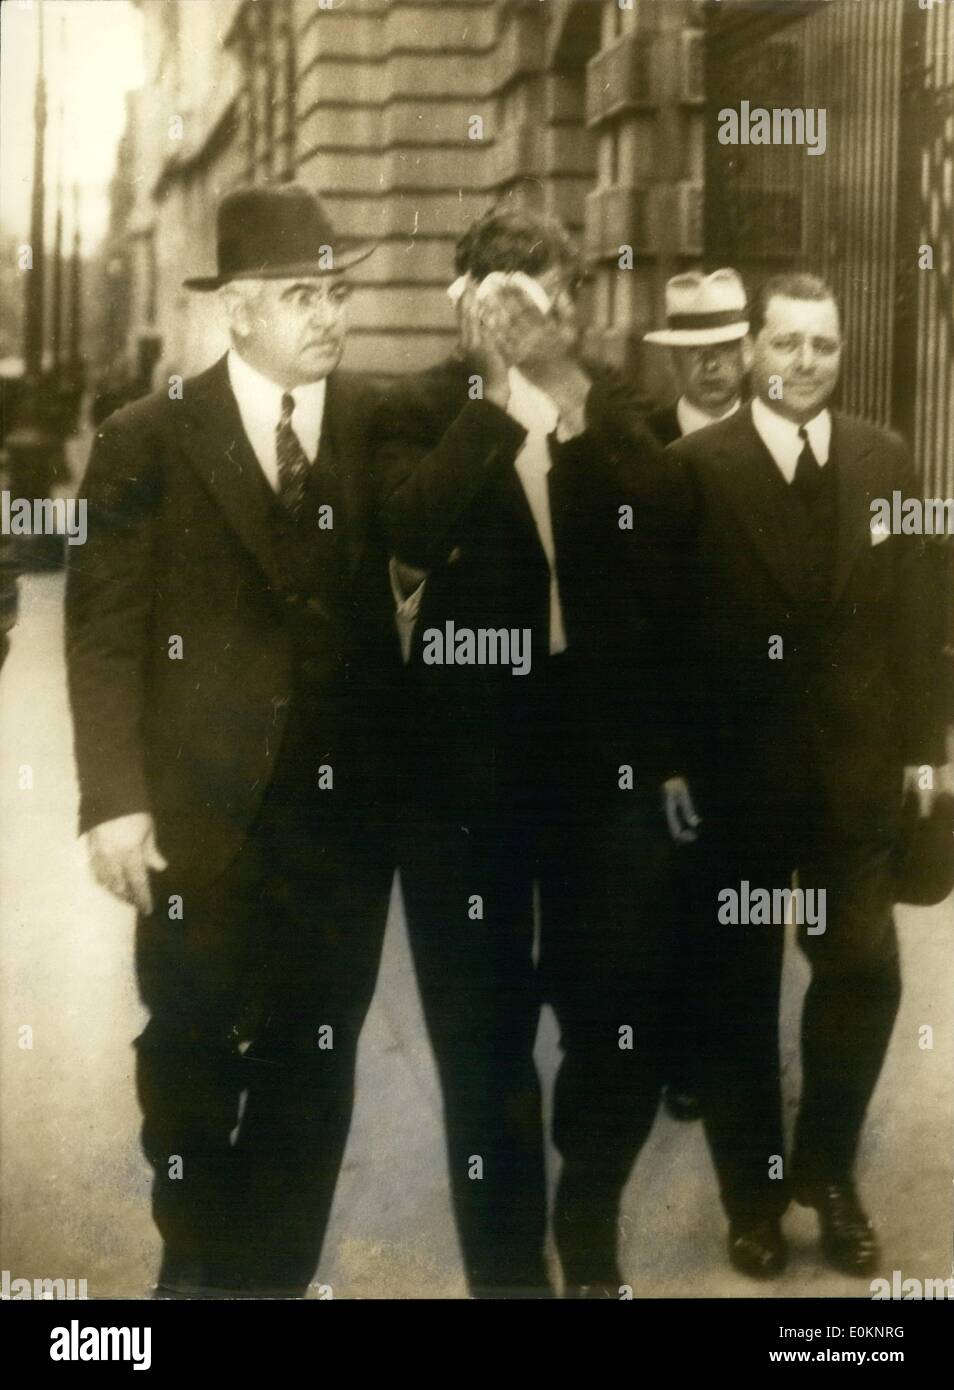 May 05, 1932 - REVEALS STORY OF LINDY BABE'S DEATH TO POLICE NEW YORK - FRANK PARICH, CENTER SHOWN WITH ASST DISTRICT ATTORNEY CONN OF THE COUNTRY, AND POLICE CEICIAES, LEAVING POLICE HEADCUAQRTES AFTER JOS ALLEGED ''CONFESSION'' OF HAVINE TAKEN PART IN KIDNAPPING THE LINDESGH BABY. PARZCH NAMED RUM RUNNERS AS HIS ''ACCOMPLICES'' IN THE PLOT. ACCOGDING HIS STORY. Stock Photo